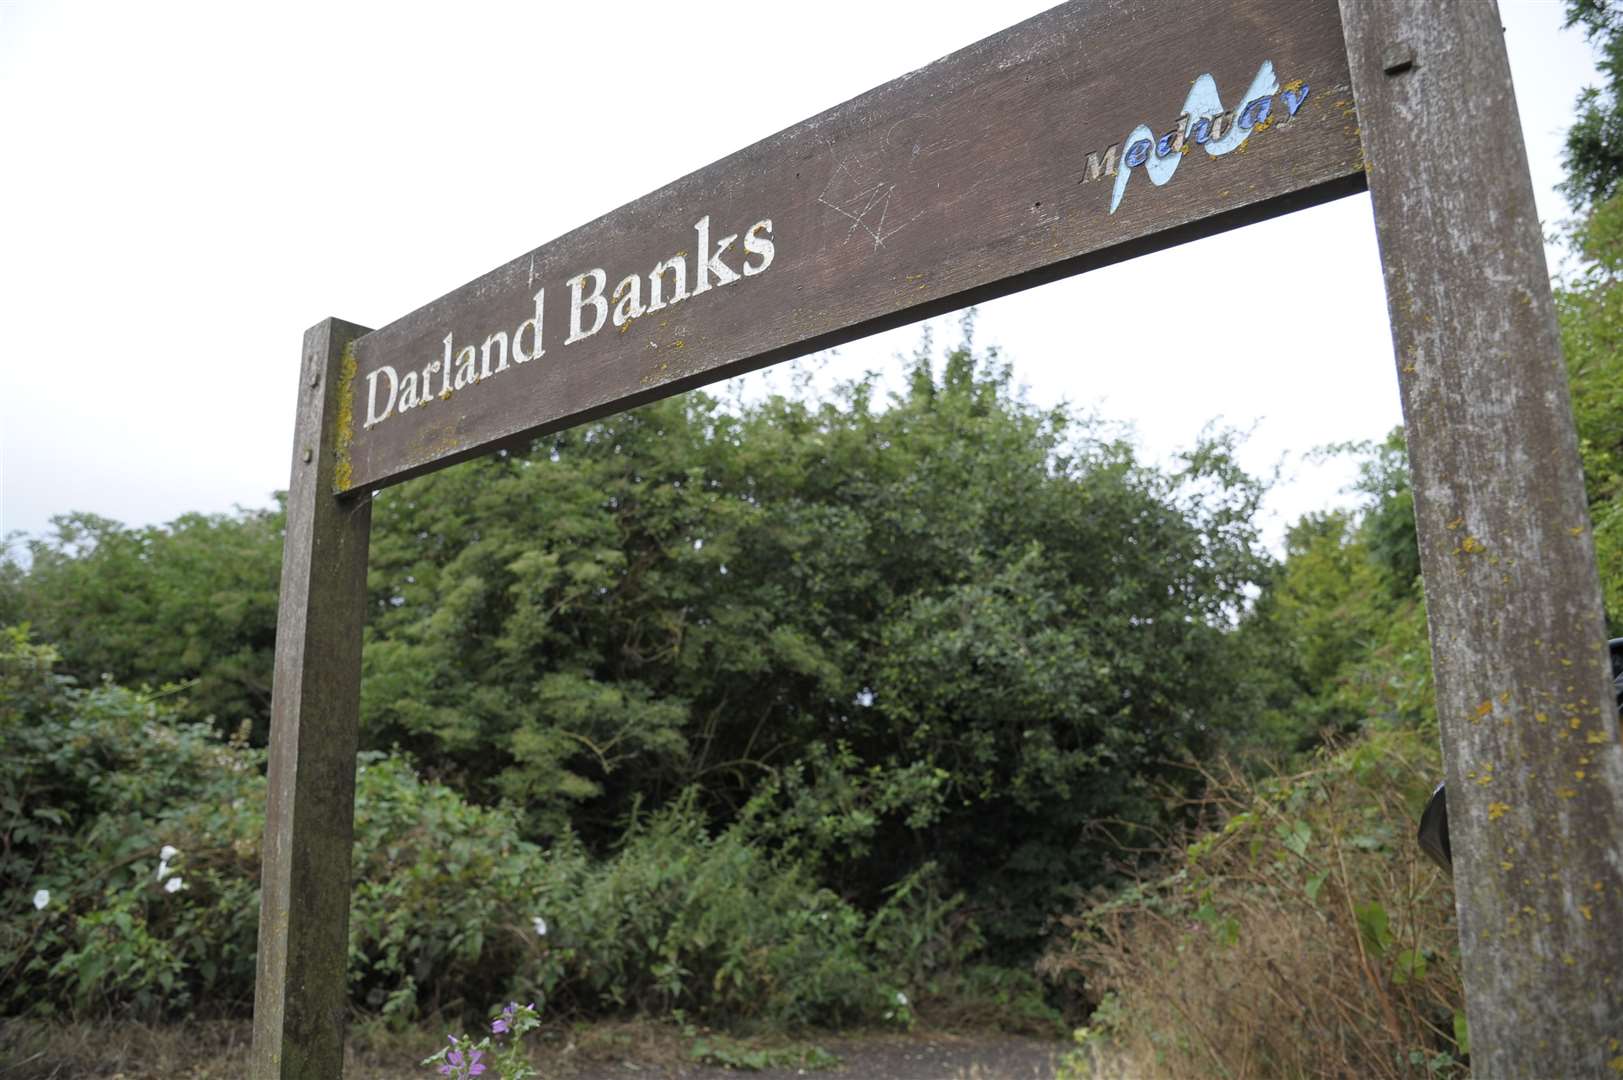 The incident is believed to have taken place in the Darland Banks Nature Reserve, near Gillingham Picture: Andy Payton